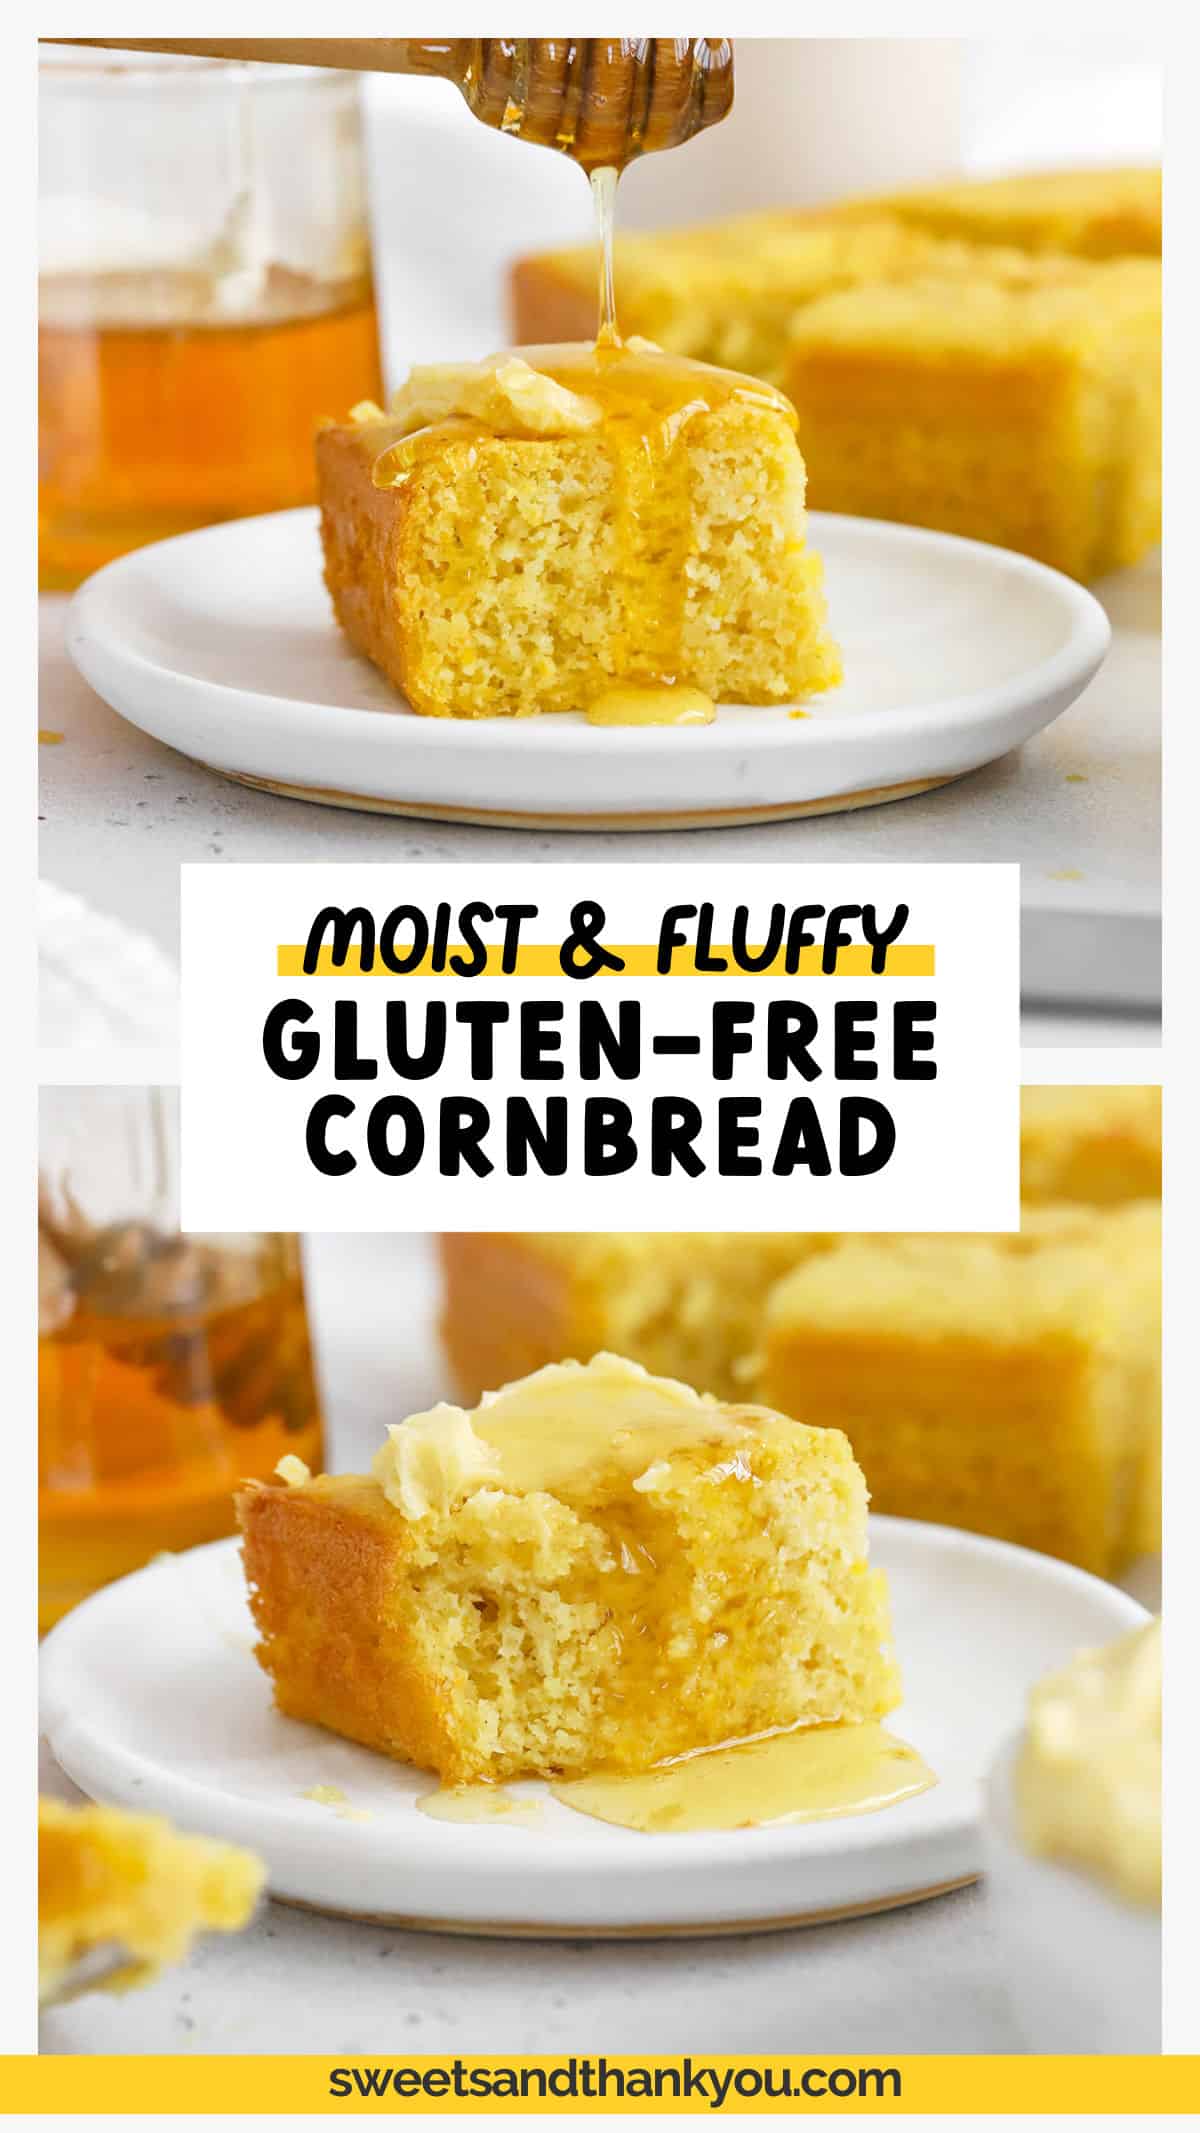 This is the BEST gluten-free cornbread recipe we've ever tried. Fluffy, moist, perfectly sweet & easy to make! Now, you can make moist gluten-free cornbread without a mix! This easy gluten-free cornbread recipe mixes up in minutes, has a light, moist, fluffy texture (THE BEST TEXTURE!), and gently sweet flavor. It's the perfect side dish for chili, soup, bbq, salads, and more! 